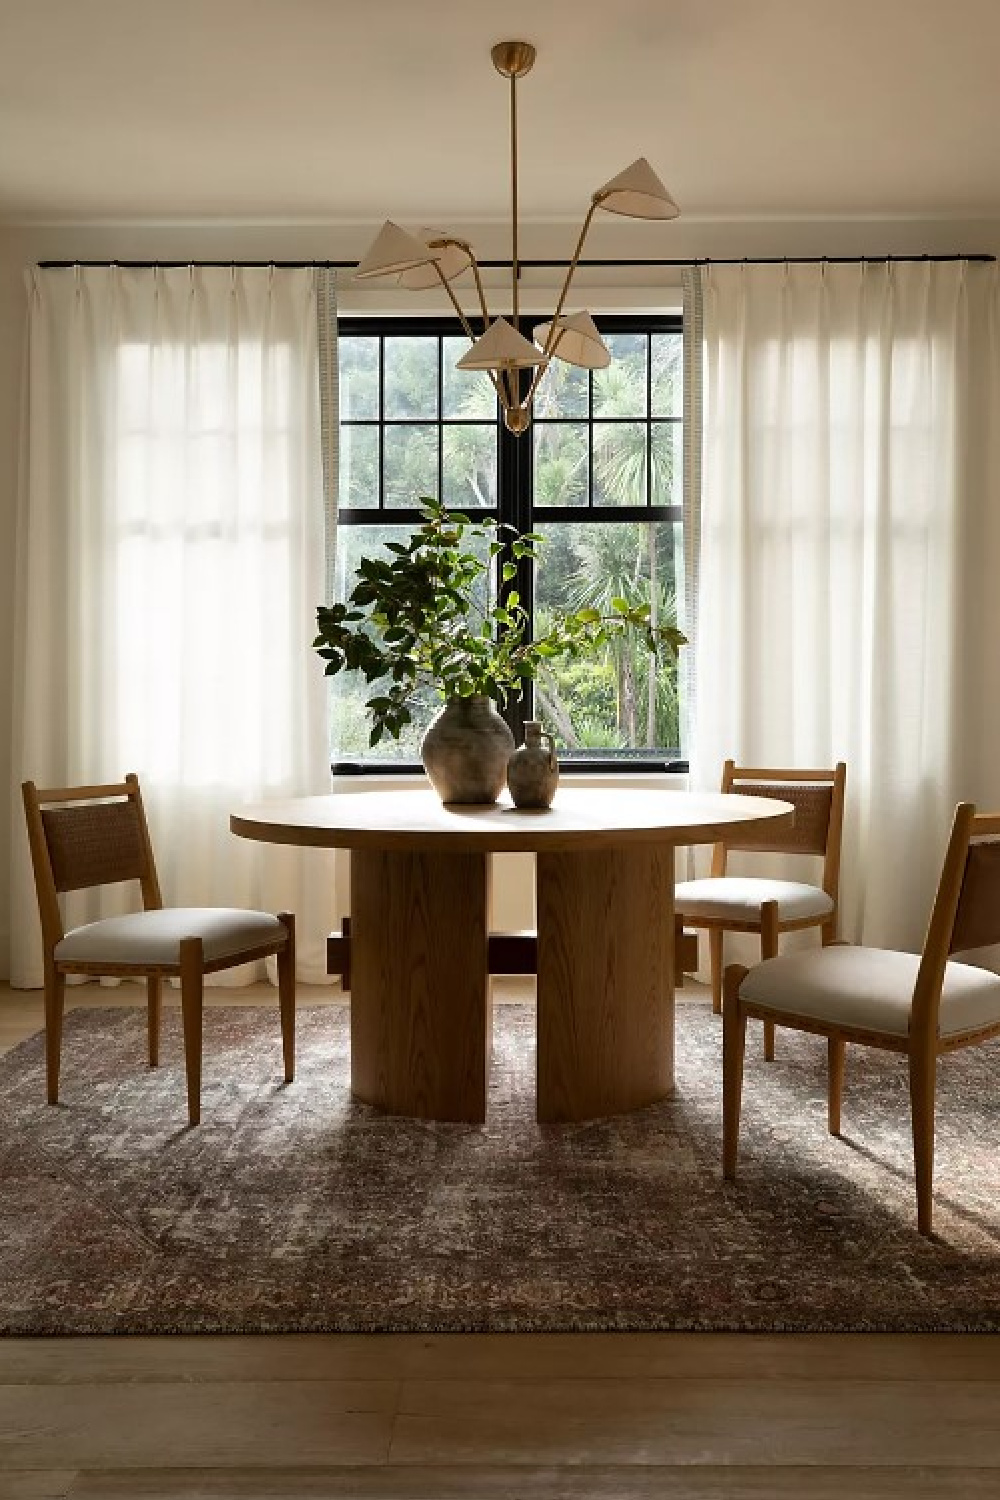 Beautiful California contemporary style dining room by Amber Lewis with Amphora Vase. #diningrooms #modernrustic